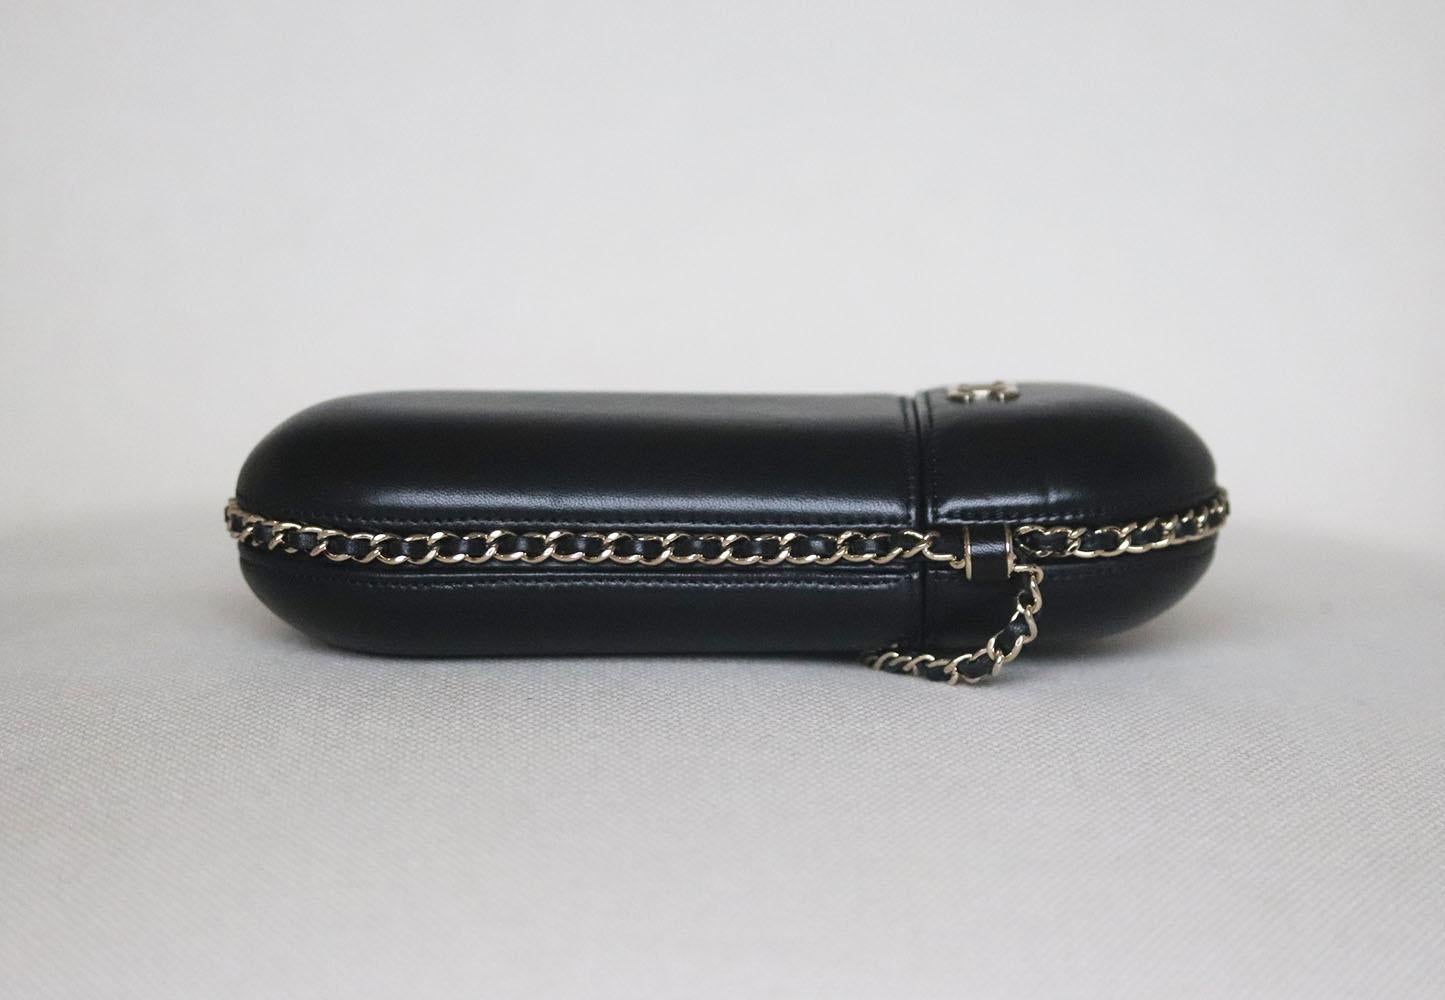 Chanel Lambskin Chain Around Phone Holder Bag has been hand-finished by skilled artisans in the label's workshop, it is boasting a black lambskin exterior, this design is accented with silver-toned and black lambskin-leather chain strap.
Made in